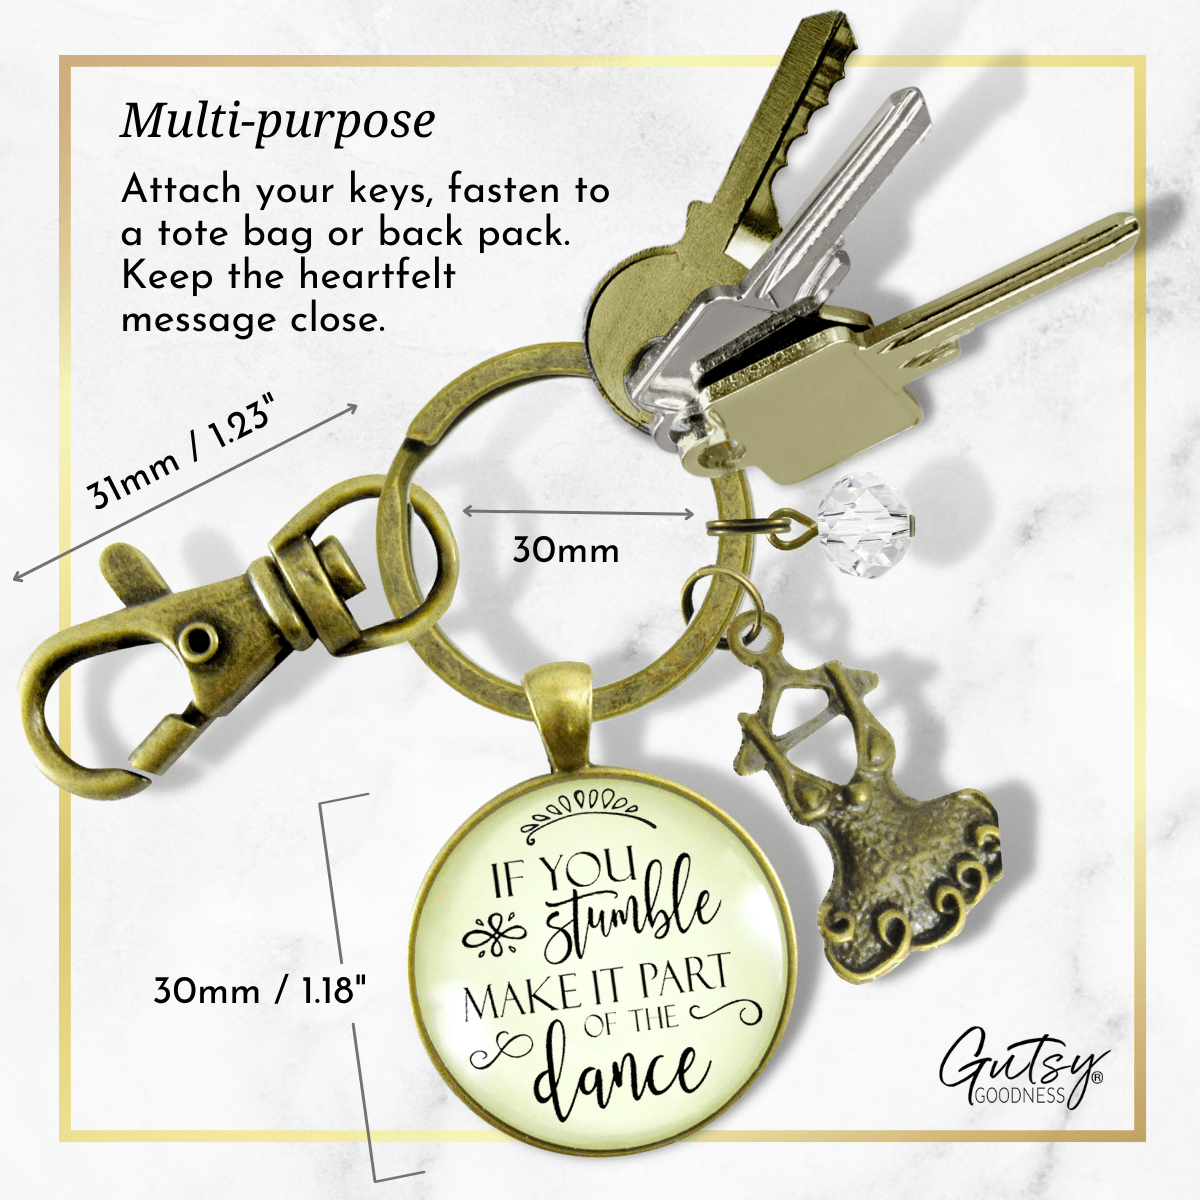 Gutsy Goodness Inspirational Keychain If You Stumble Make It Part of The Dance Mantra Glam Quote Jewelry Tutu